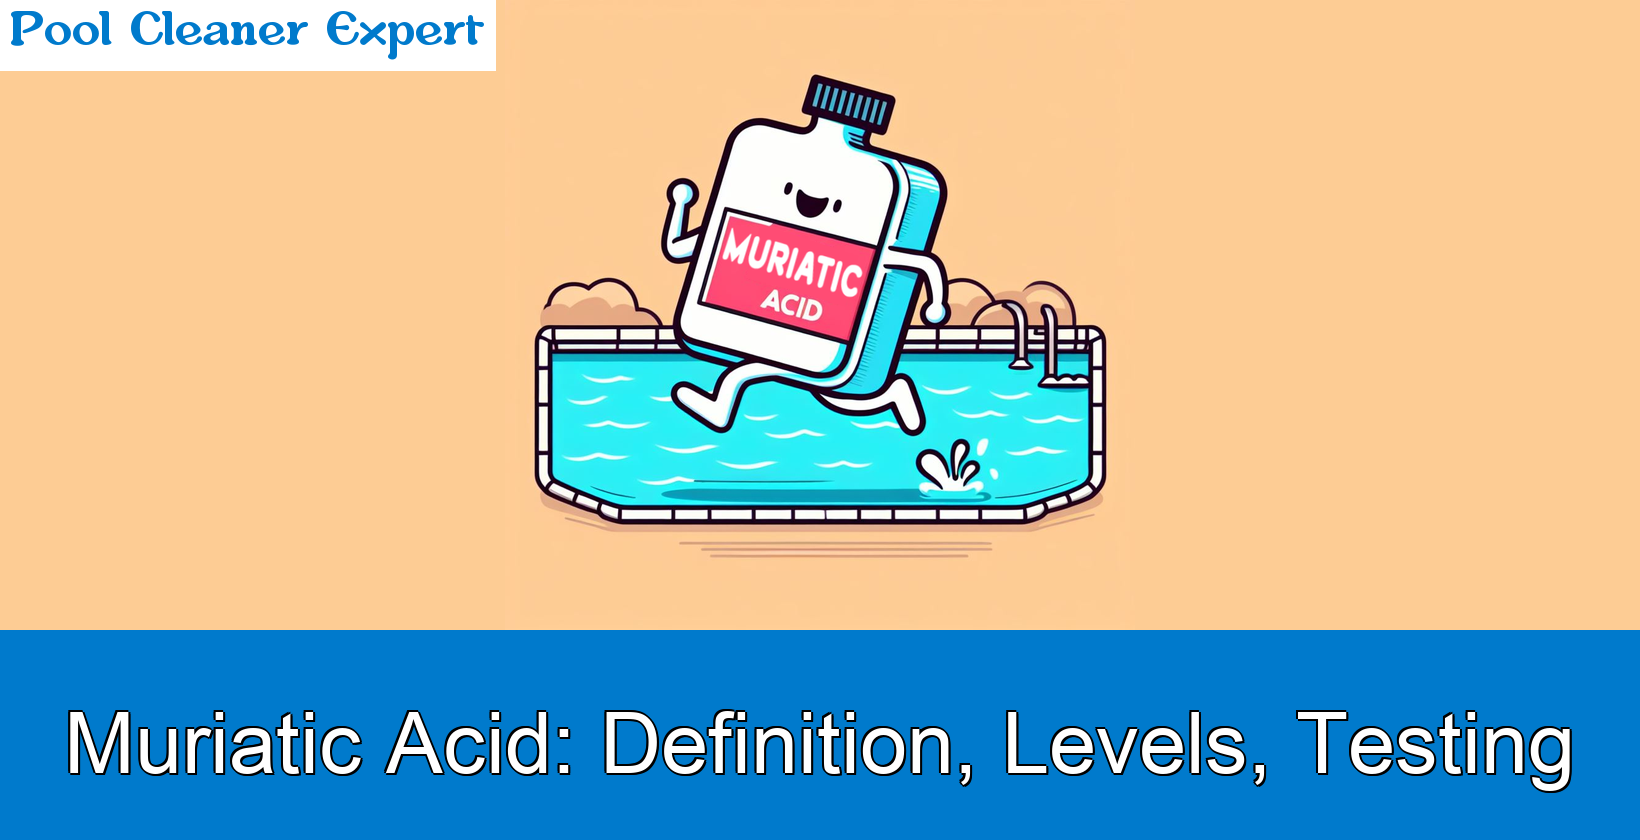 Muriatic Acid in Pools: Definition, Levels, Testing